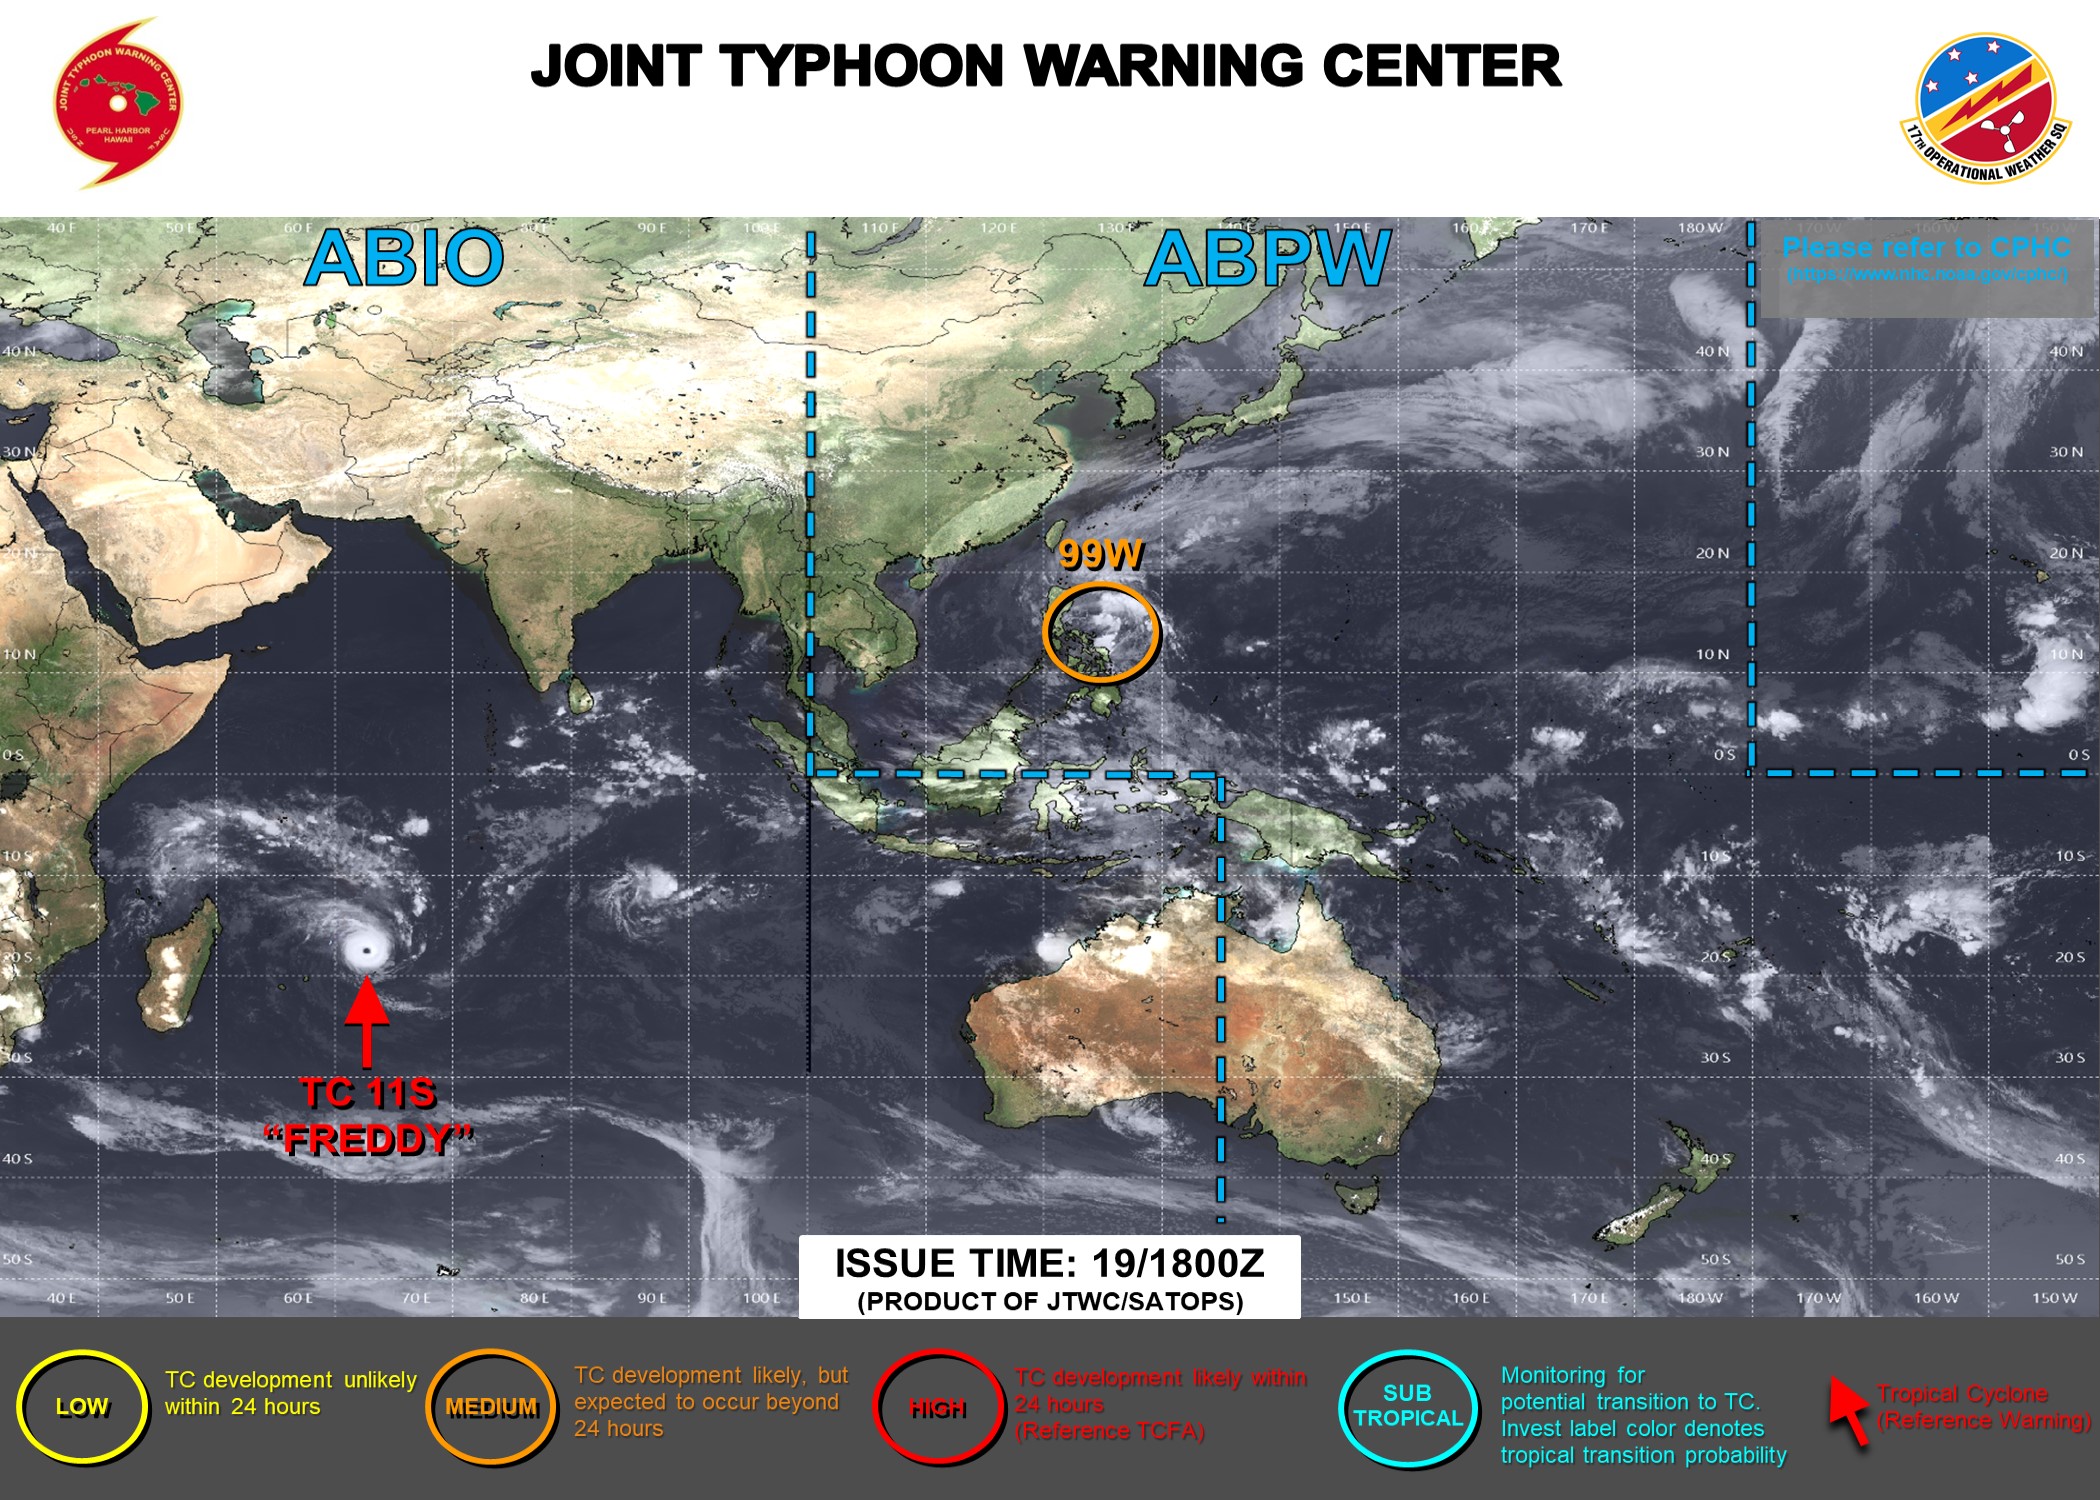 JTWC IS ISSUING 12HOURLY WARNINGS AND 3HOURLY SATELLITE BULLETINS ON TC 11S(FREDDY).